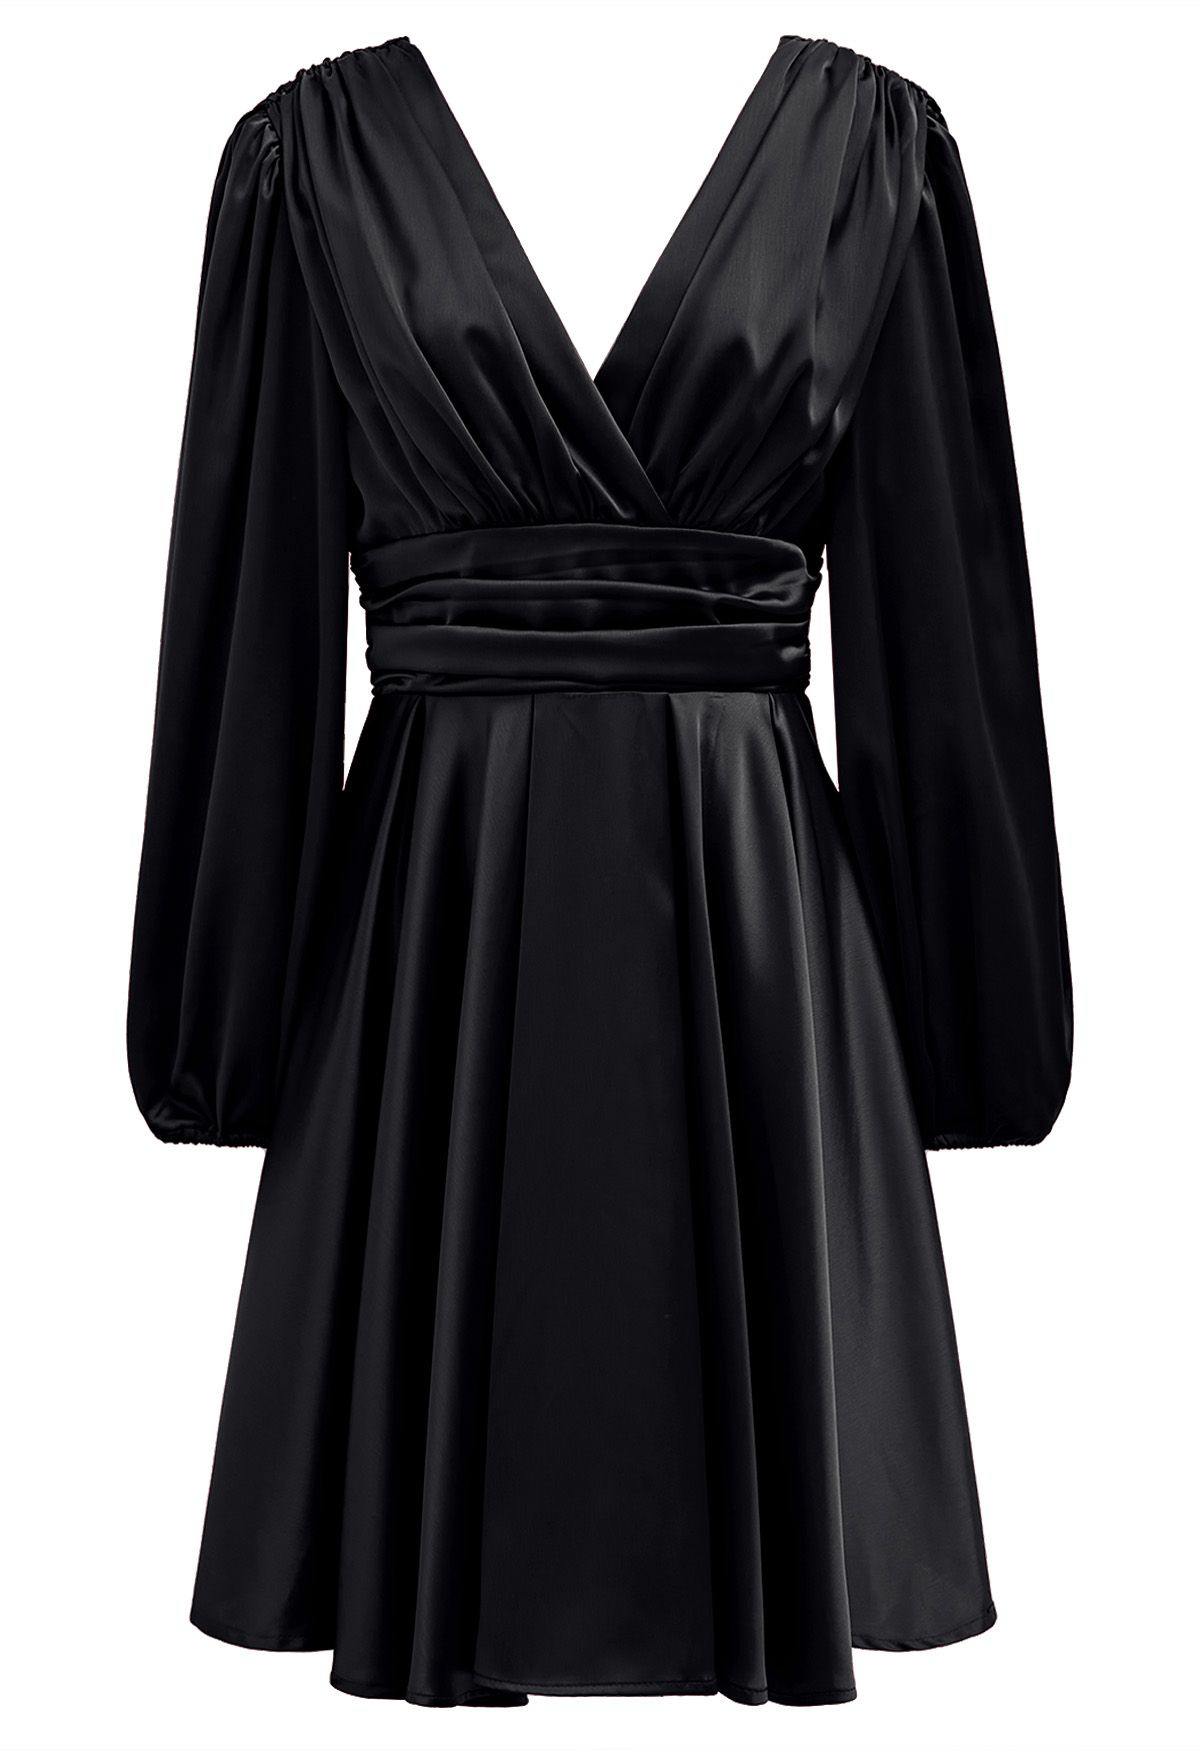 Plunging V-Neck Ruched Waist Satin Dress in Black - Retro, Indie and ...